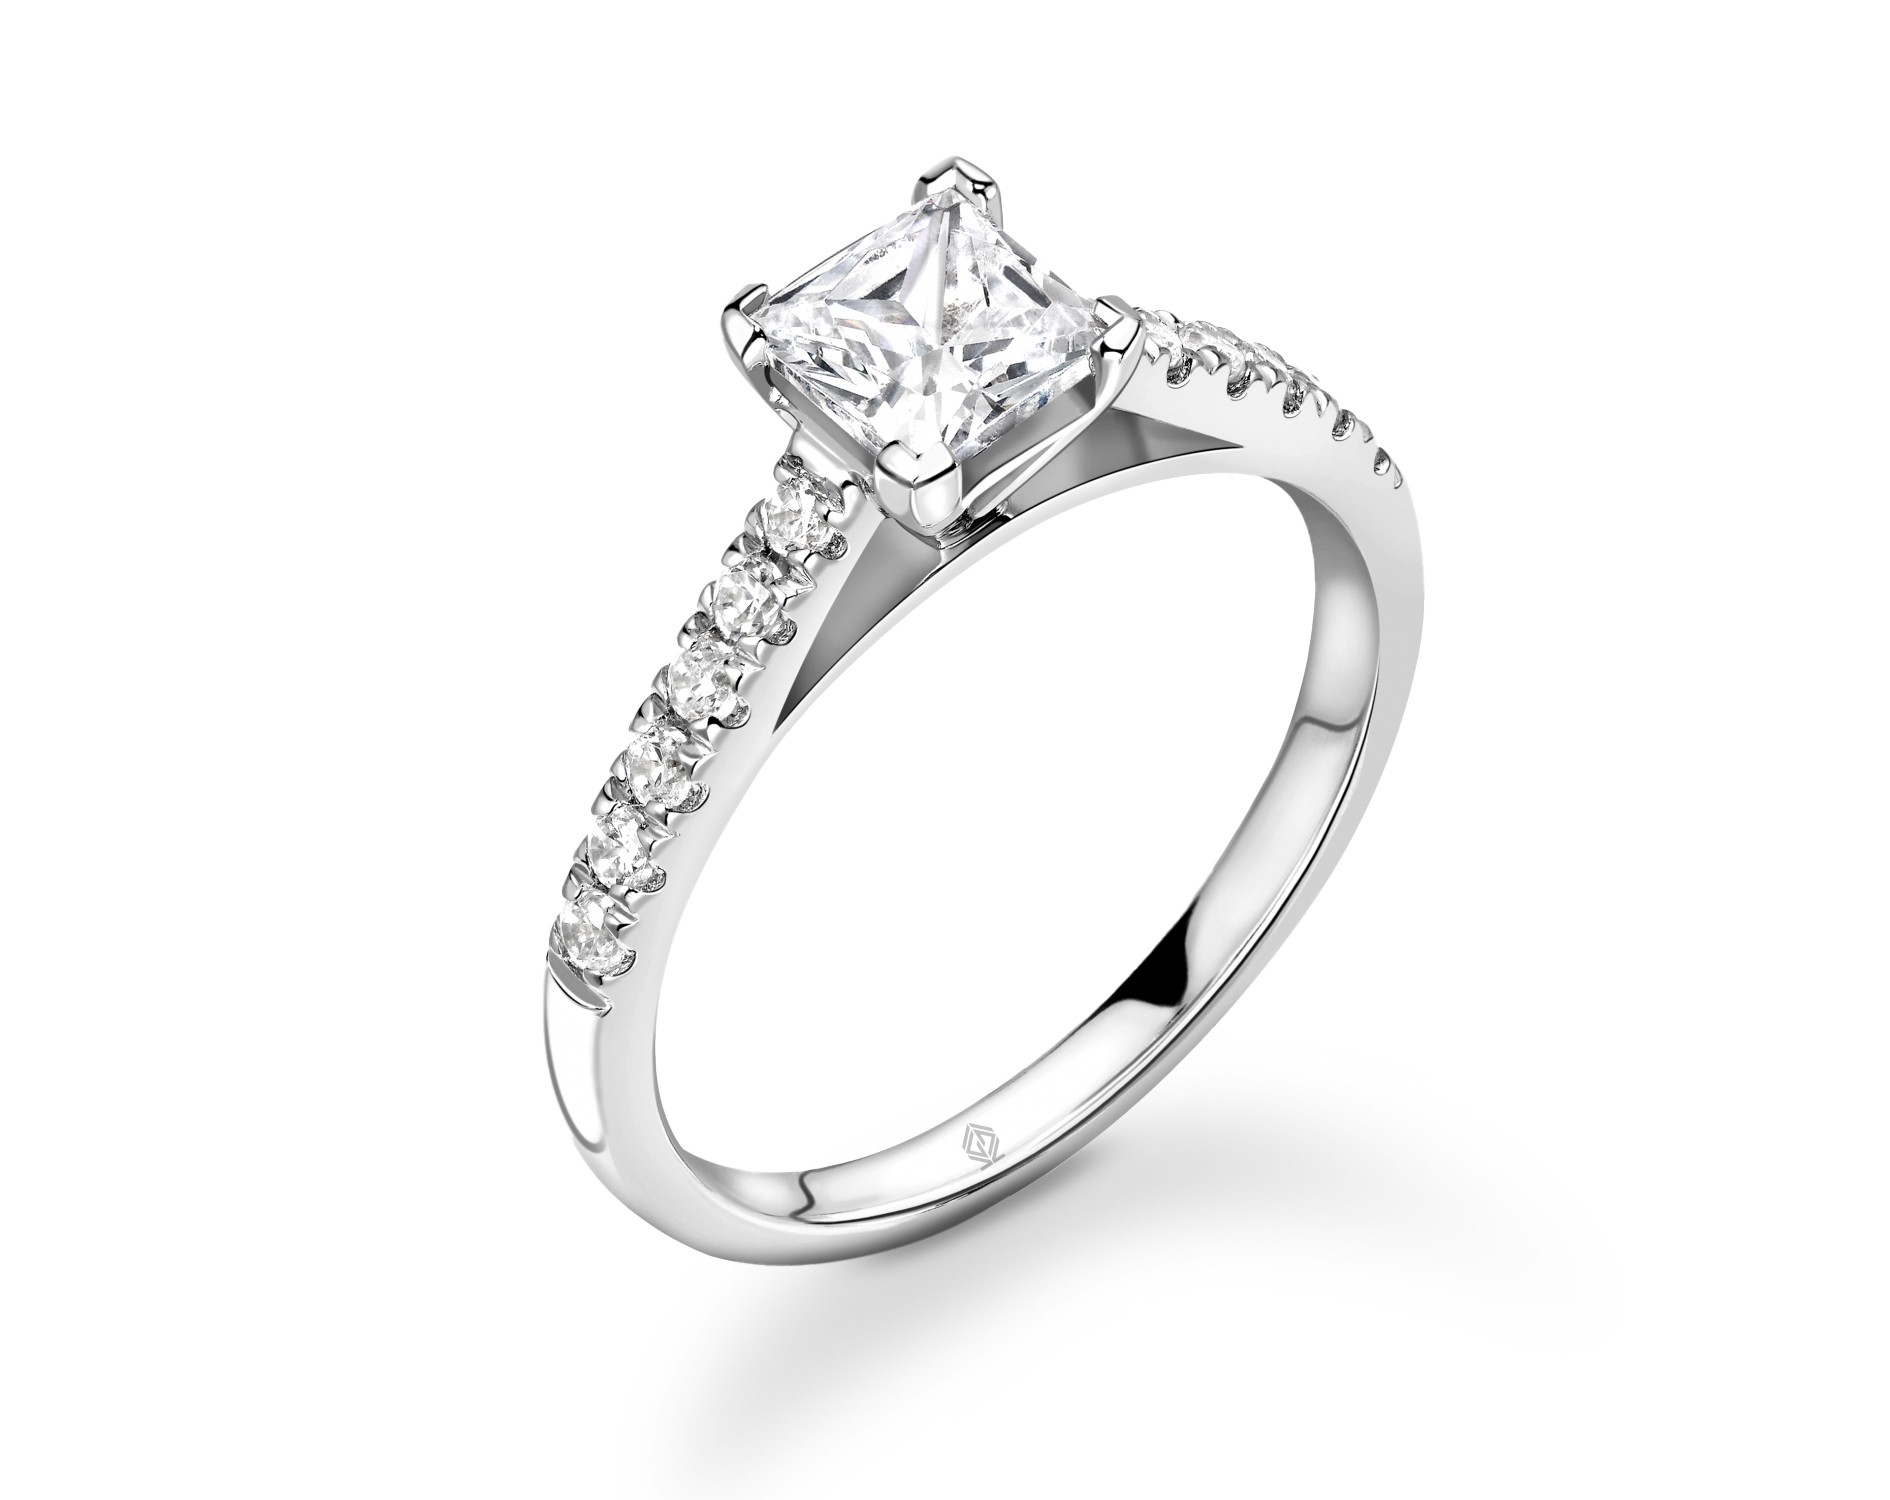 18K WHITE GOLD PRINCESS CUT DIAMOND ENGAGEMENT RING WITH SIDE STONES PAVE SET